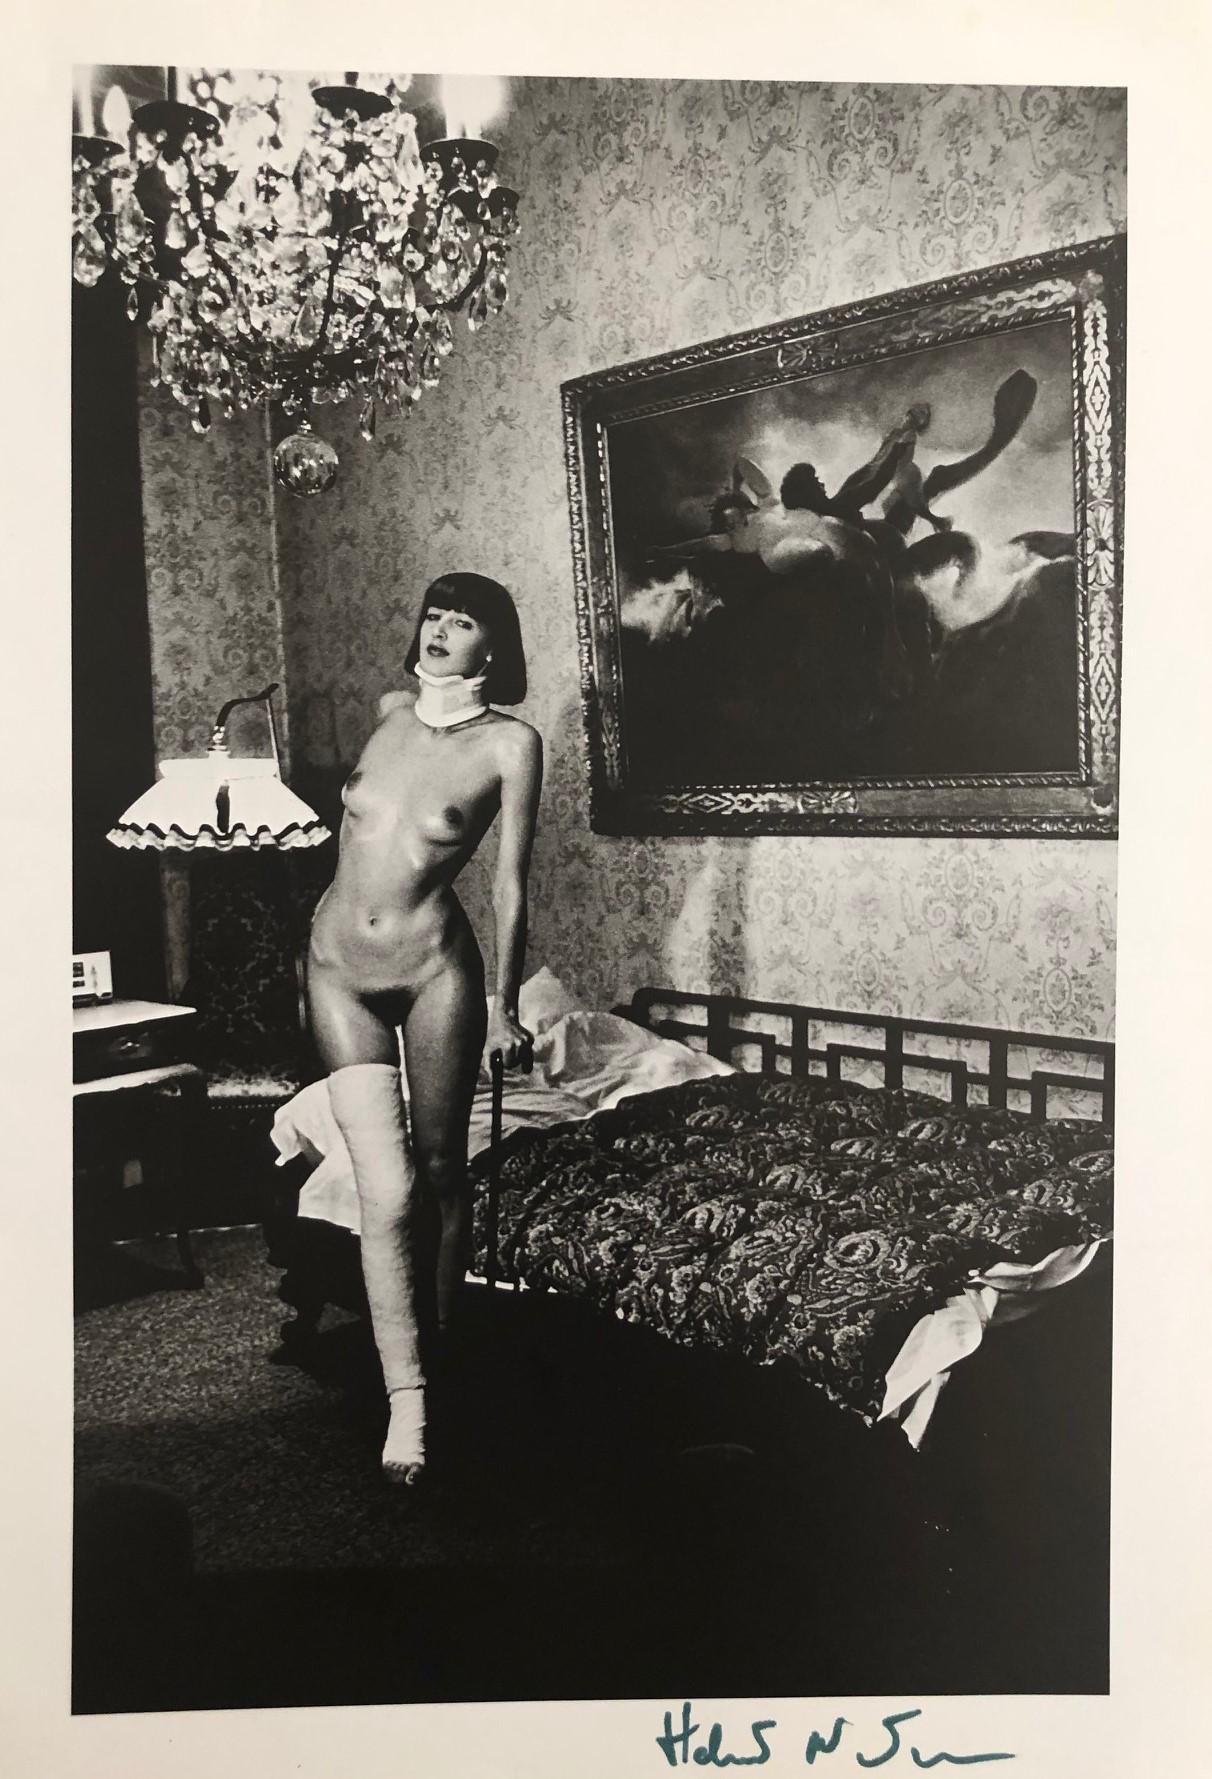 Signed black & white photo-lithography by Helmut Newton, circa 1977. Signed in black ink on the lower right; annotations on verso. The piece is in very good condition and measures 10.75